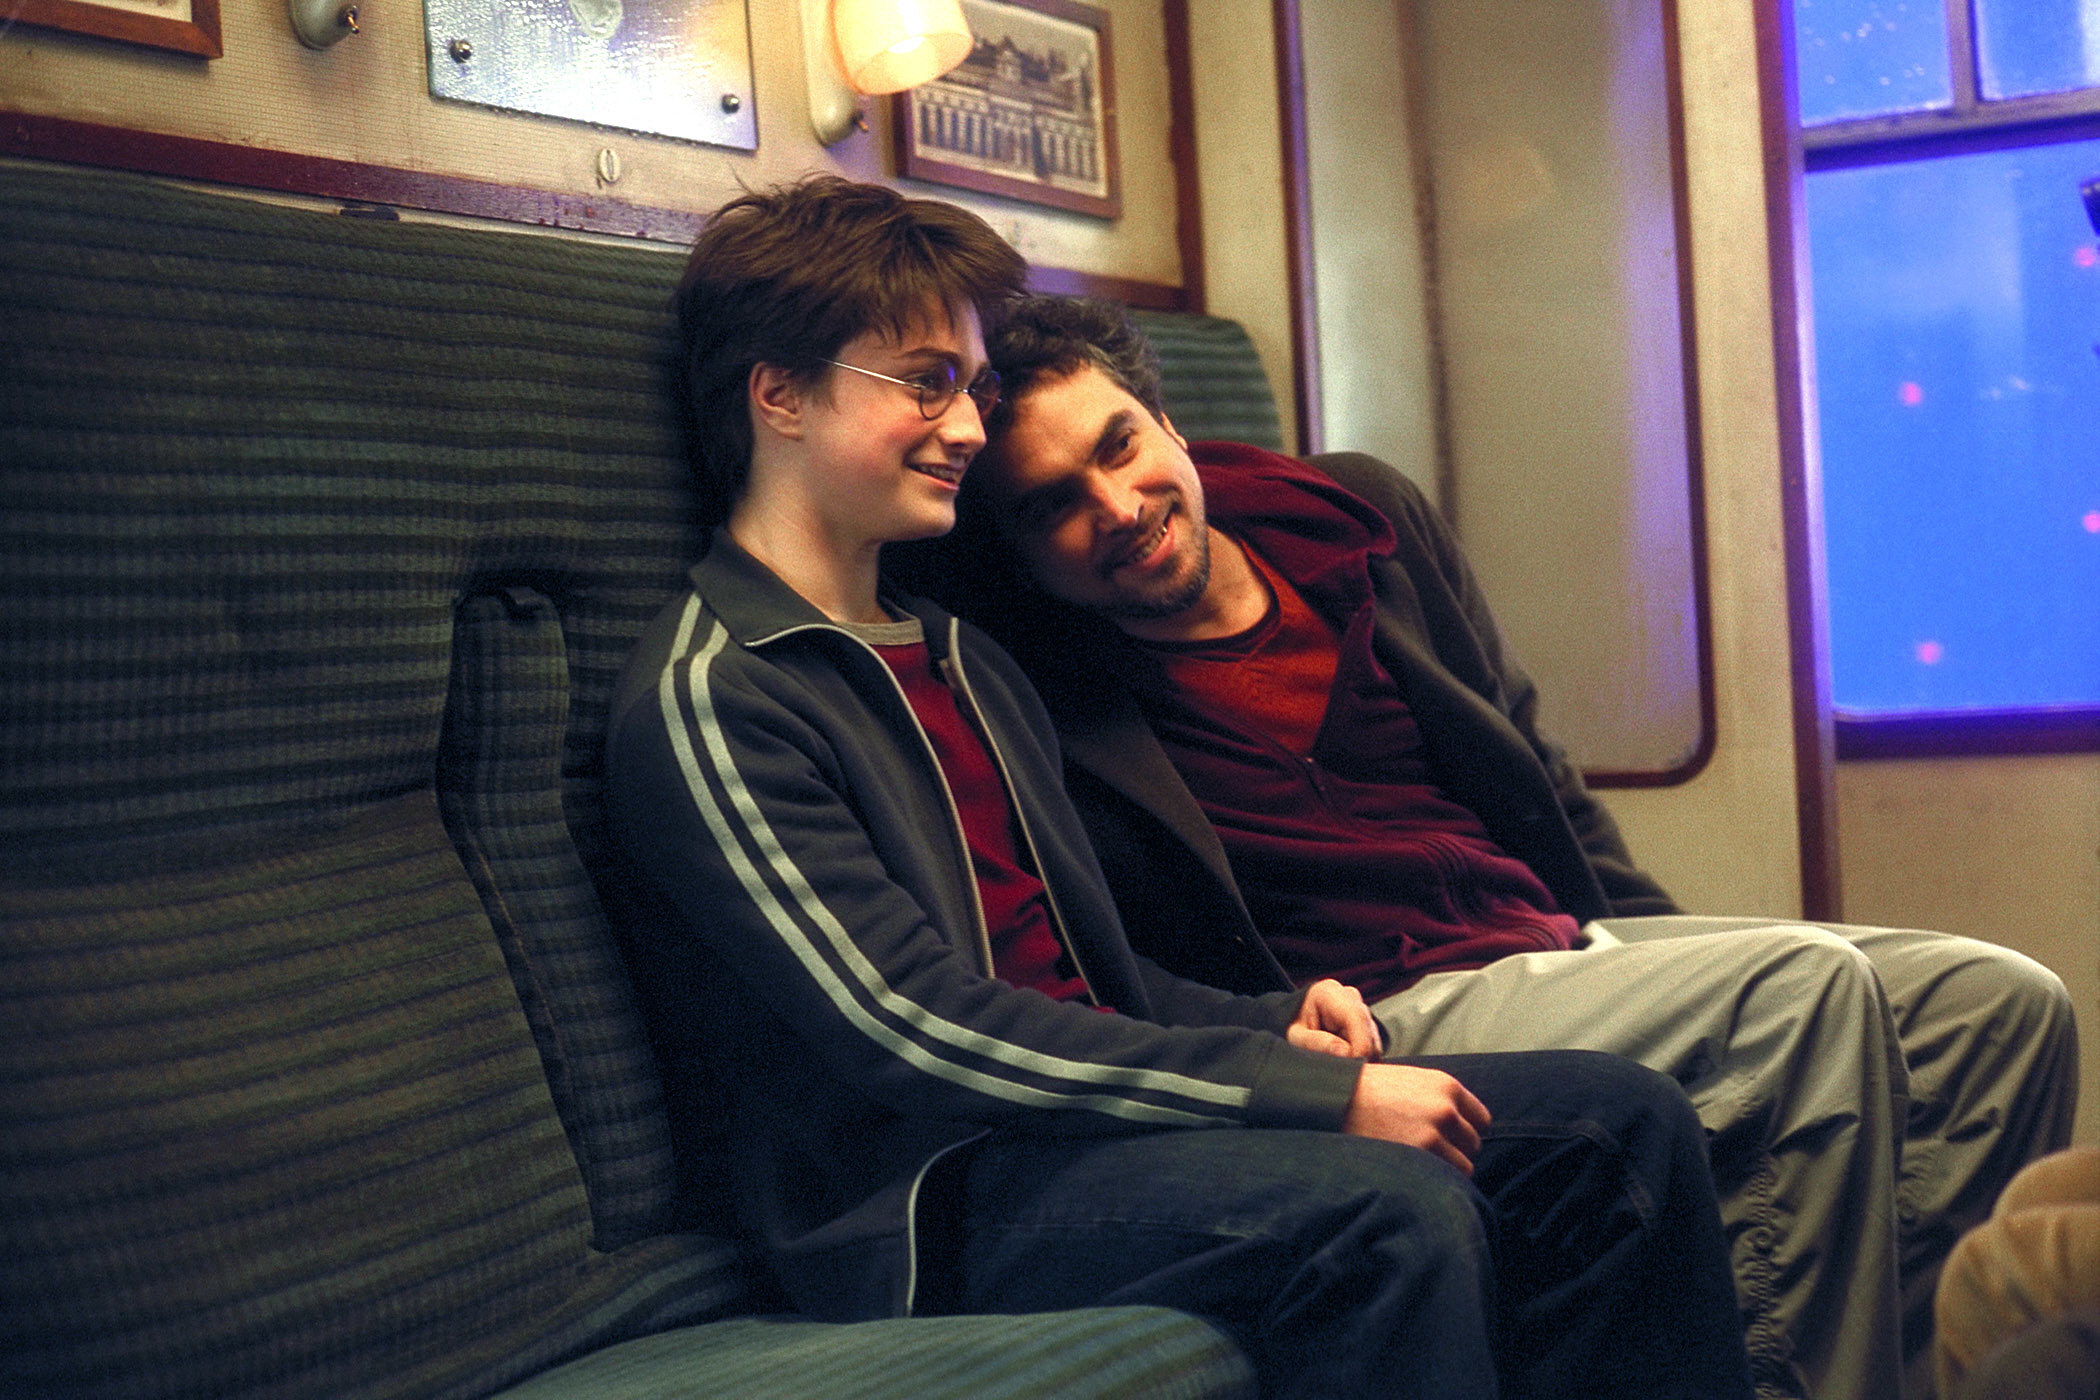 Daniel Radcliffe and Alfonso Cuarón sitting on the Hogwarts Express